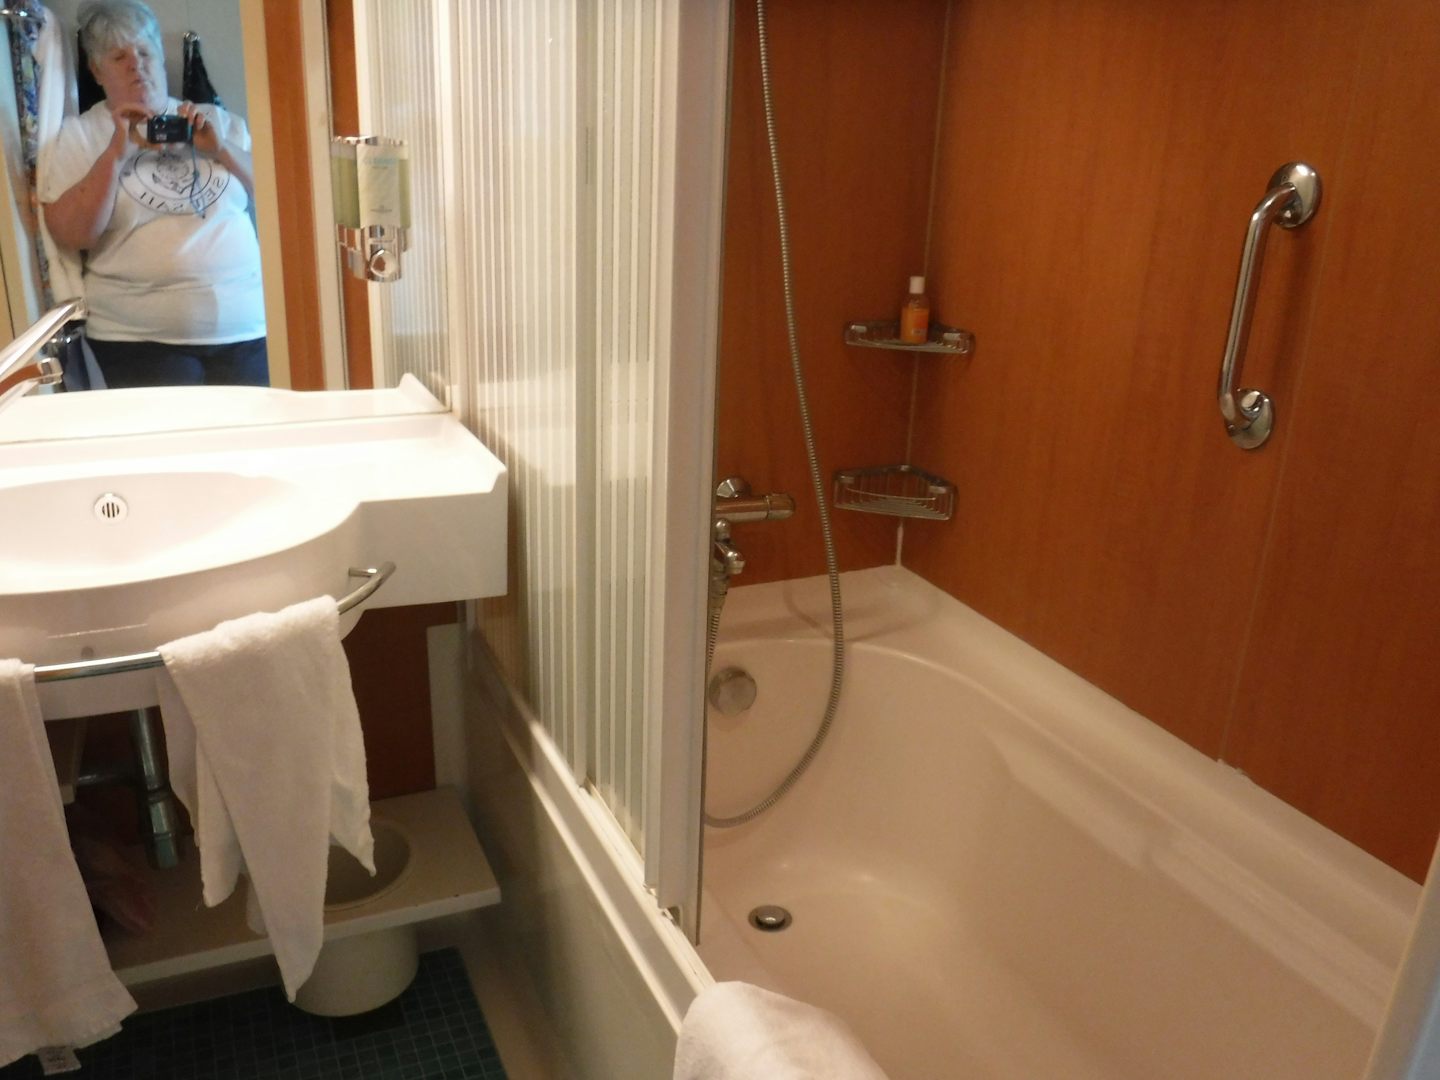 Cabin 11632  Mini Suite bathtub & sink.  Tub was small and required a high